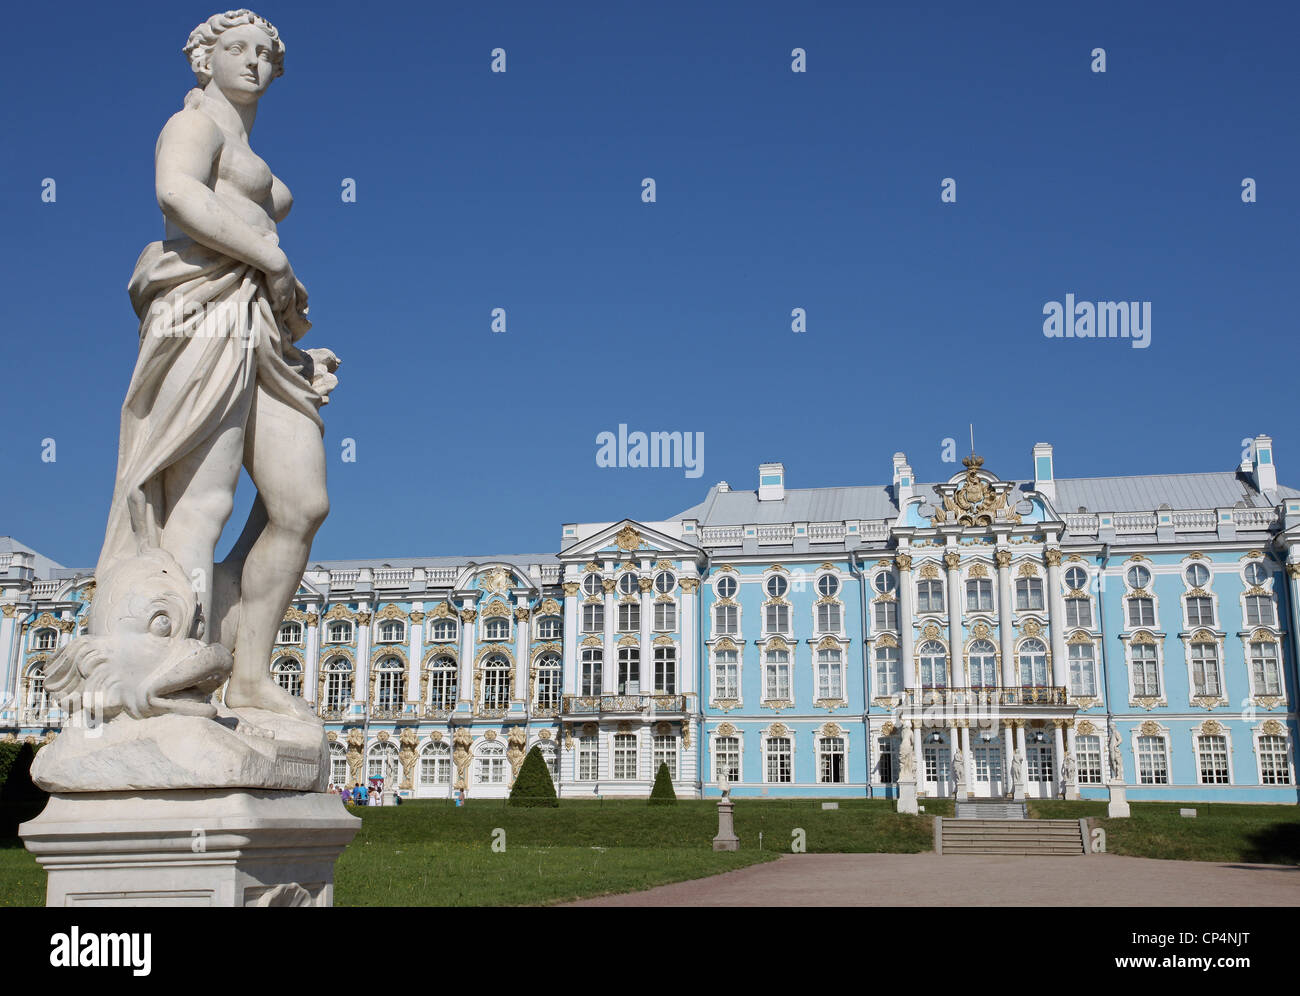 The fabulous baroque facade of the Catherine Palace south-east of St Petersburg Russia Stock Photo